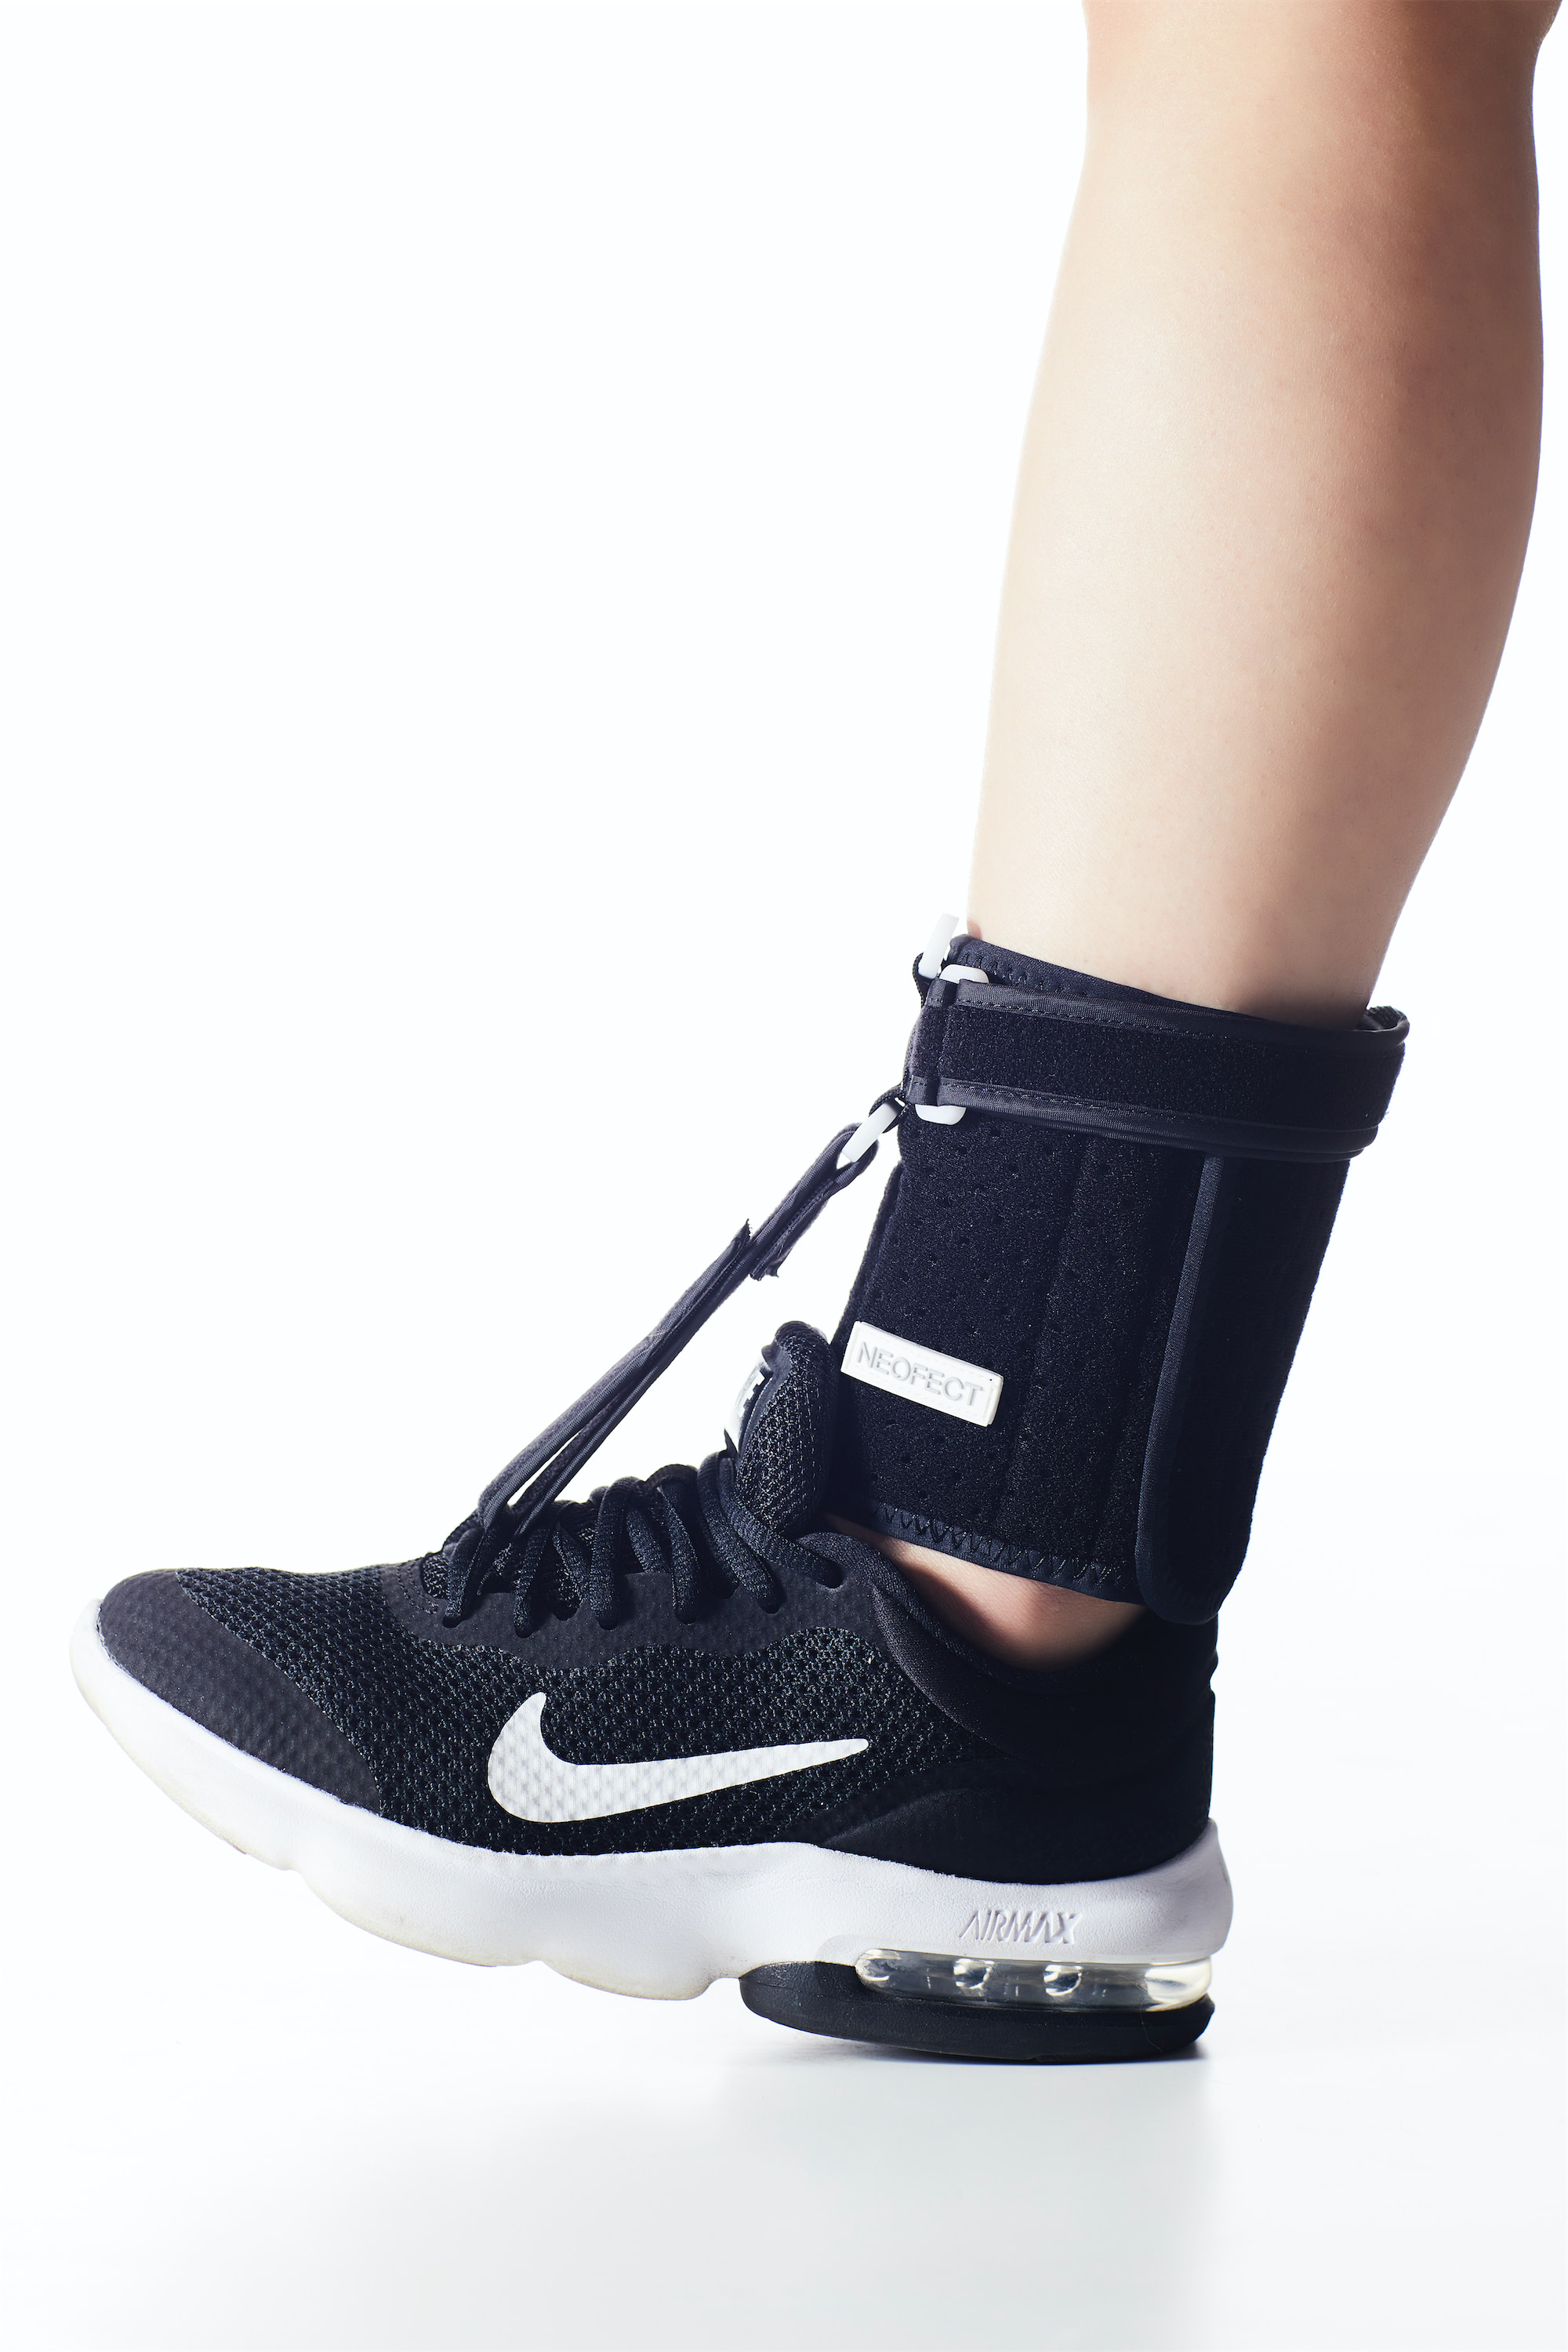 Foot-Up Brace by Neofect FOR SALE - FREE Shipping